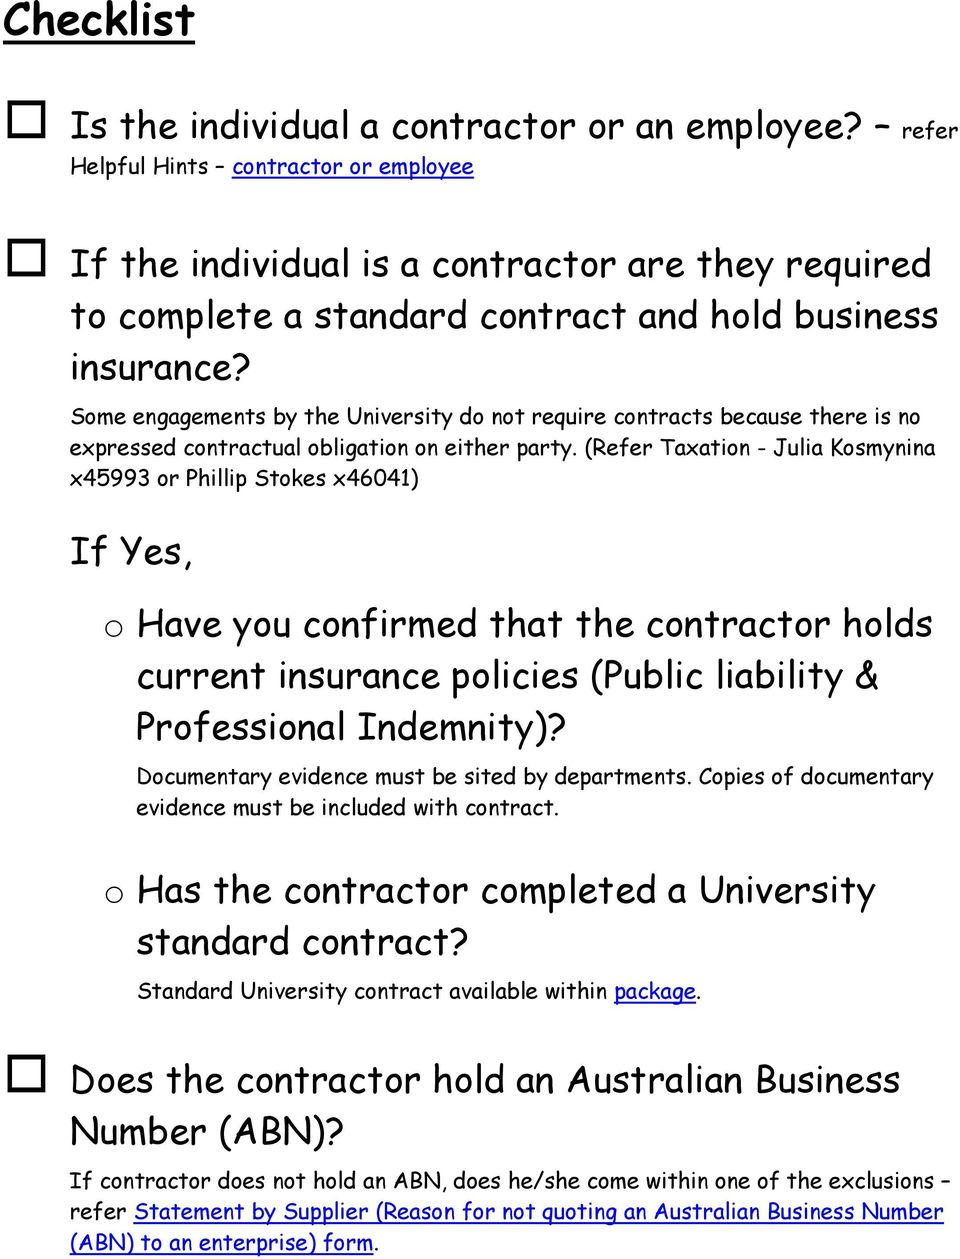 Some engagements by the University do not require contracts because there is no expressed contractual obligation on either party.